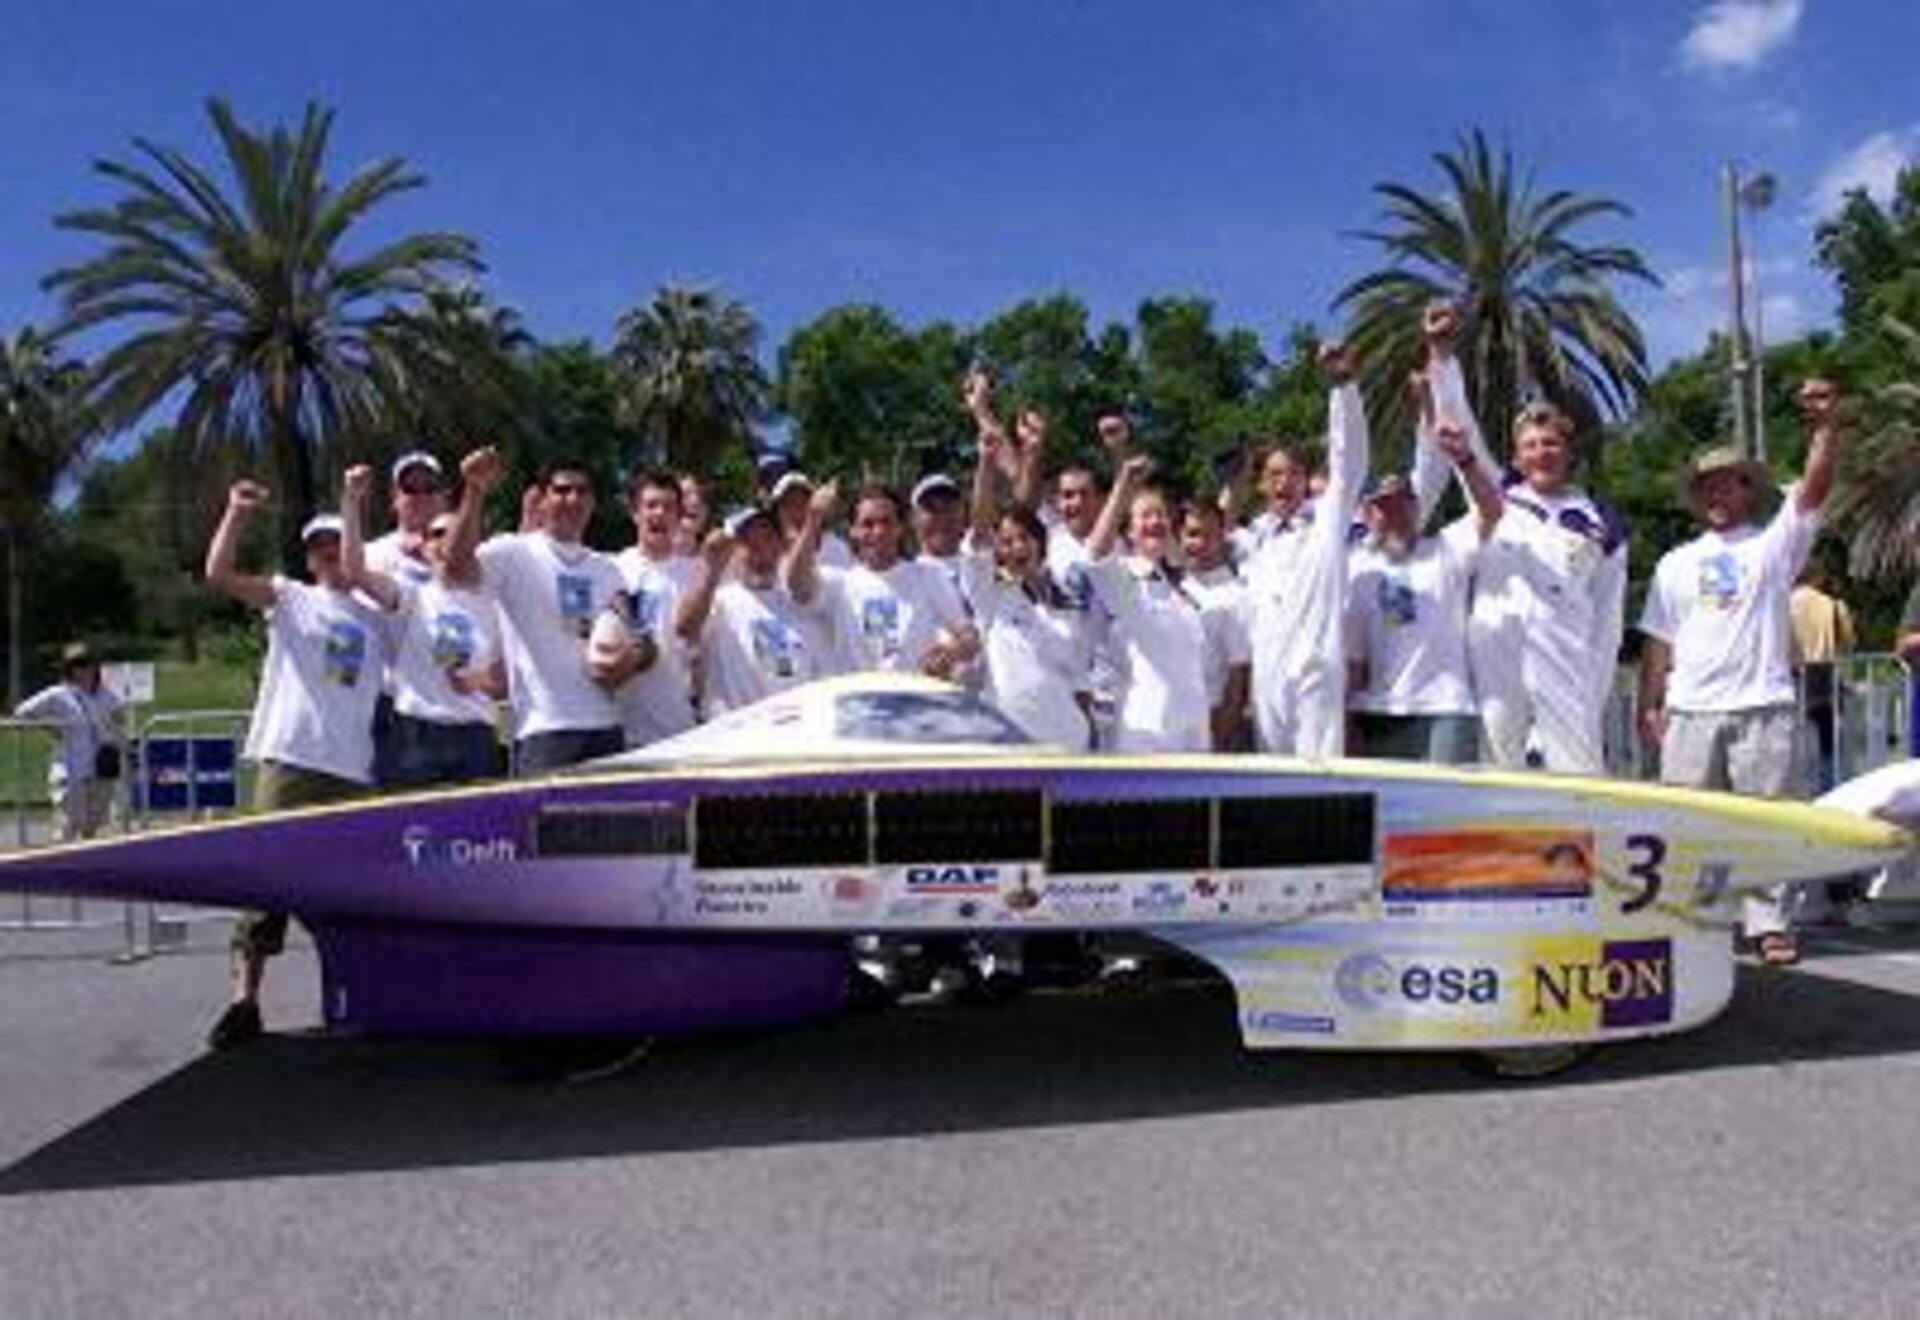 The entire Nuna team and its victorious vehicle